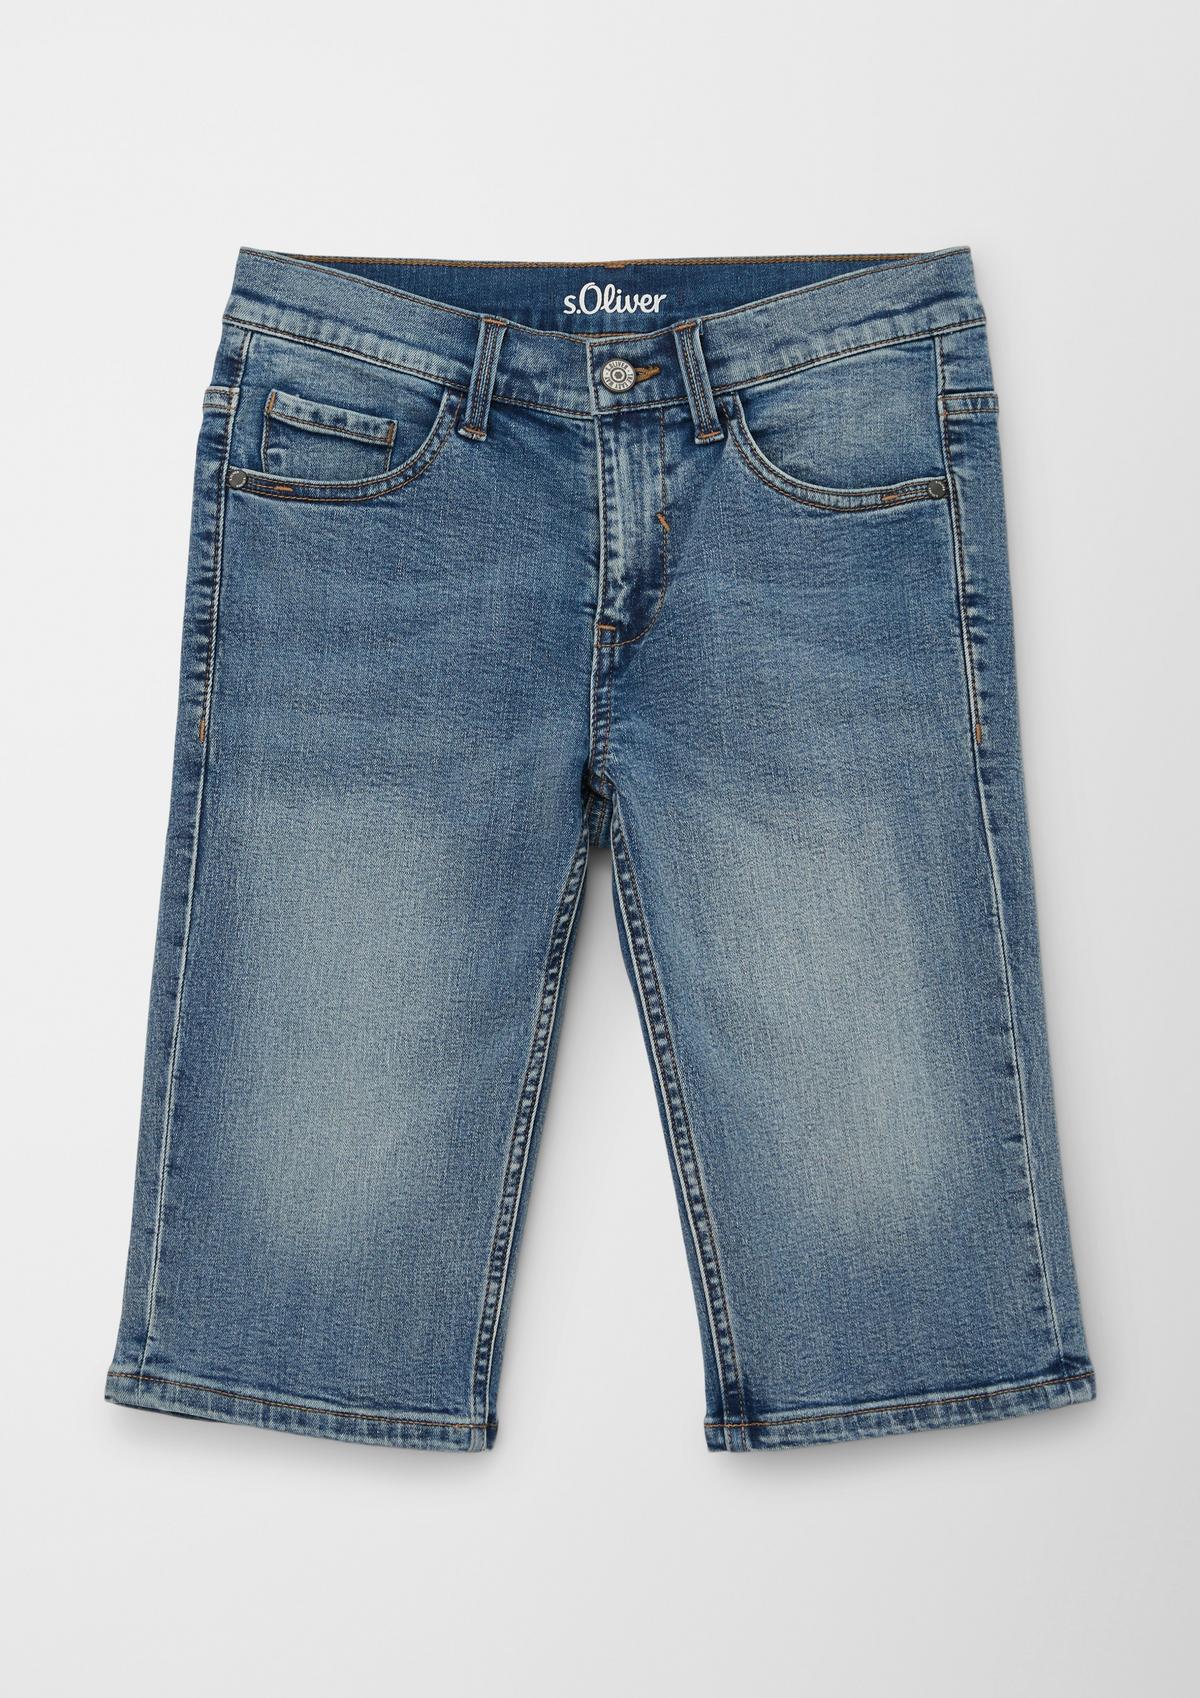 s.Oliver Seattle: Denim Bermudas with contrasting stitching